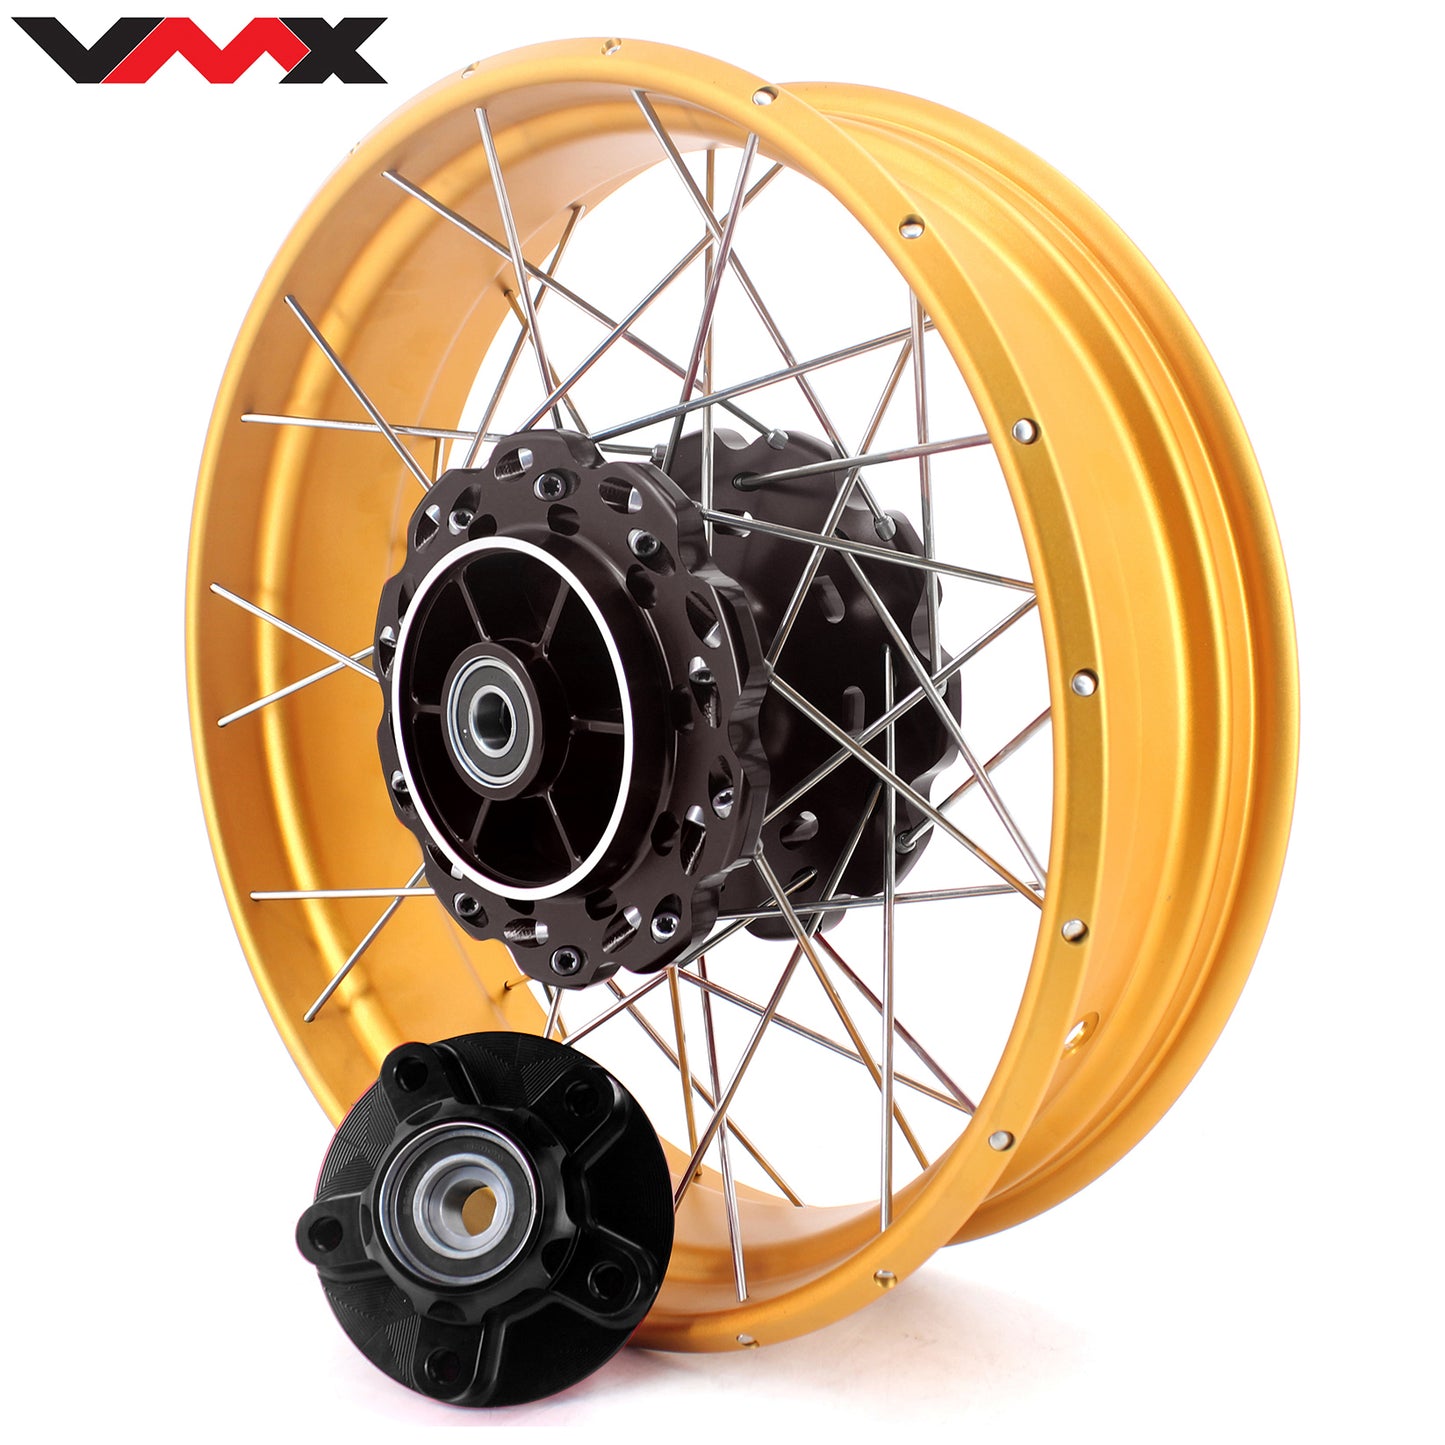 VMX 4.25*18 Inch Rear Tubeless Alloy Wheels Fit For Honda Africa Twin CRF1000L 2016-2020 CRF1100L 2021-2023